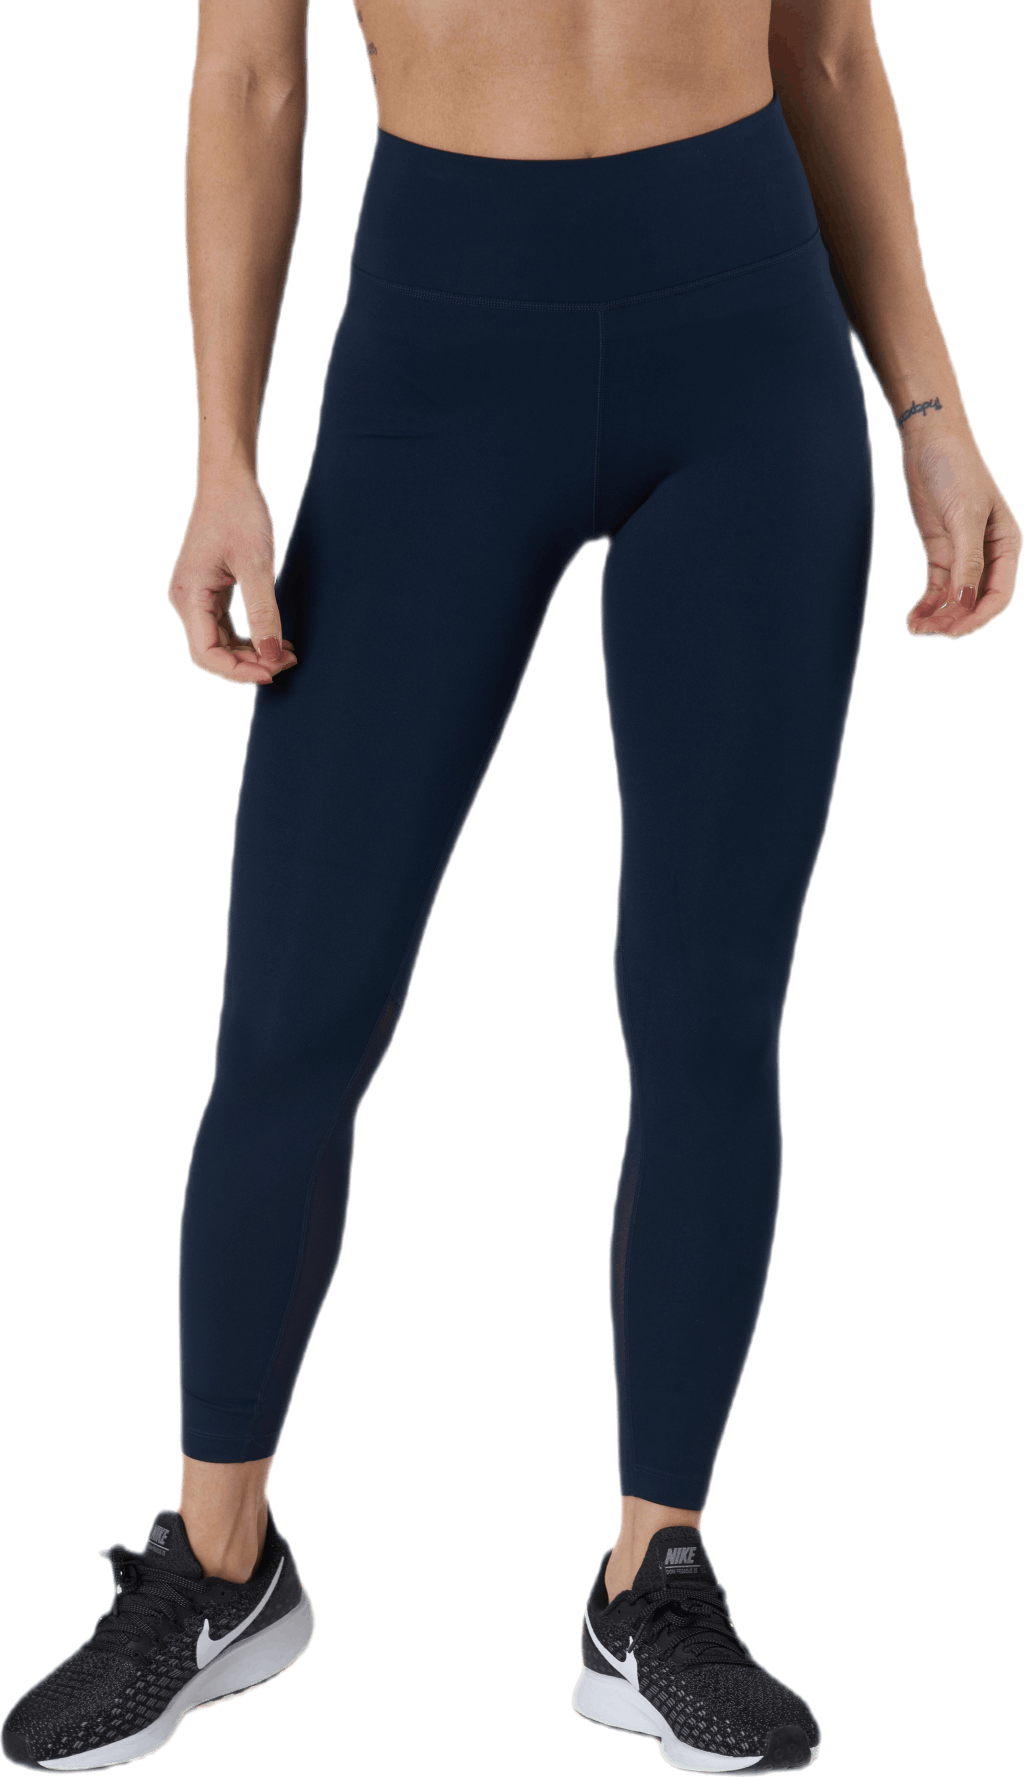 One Mid-Rise 7/8 Tight Blue